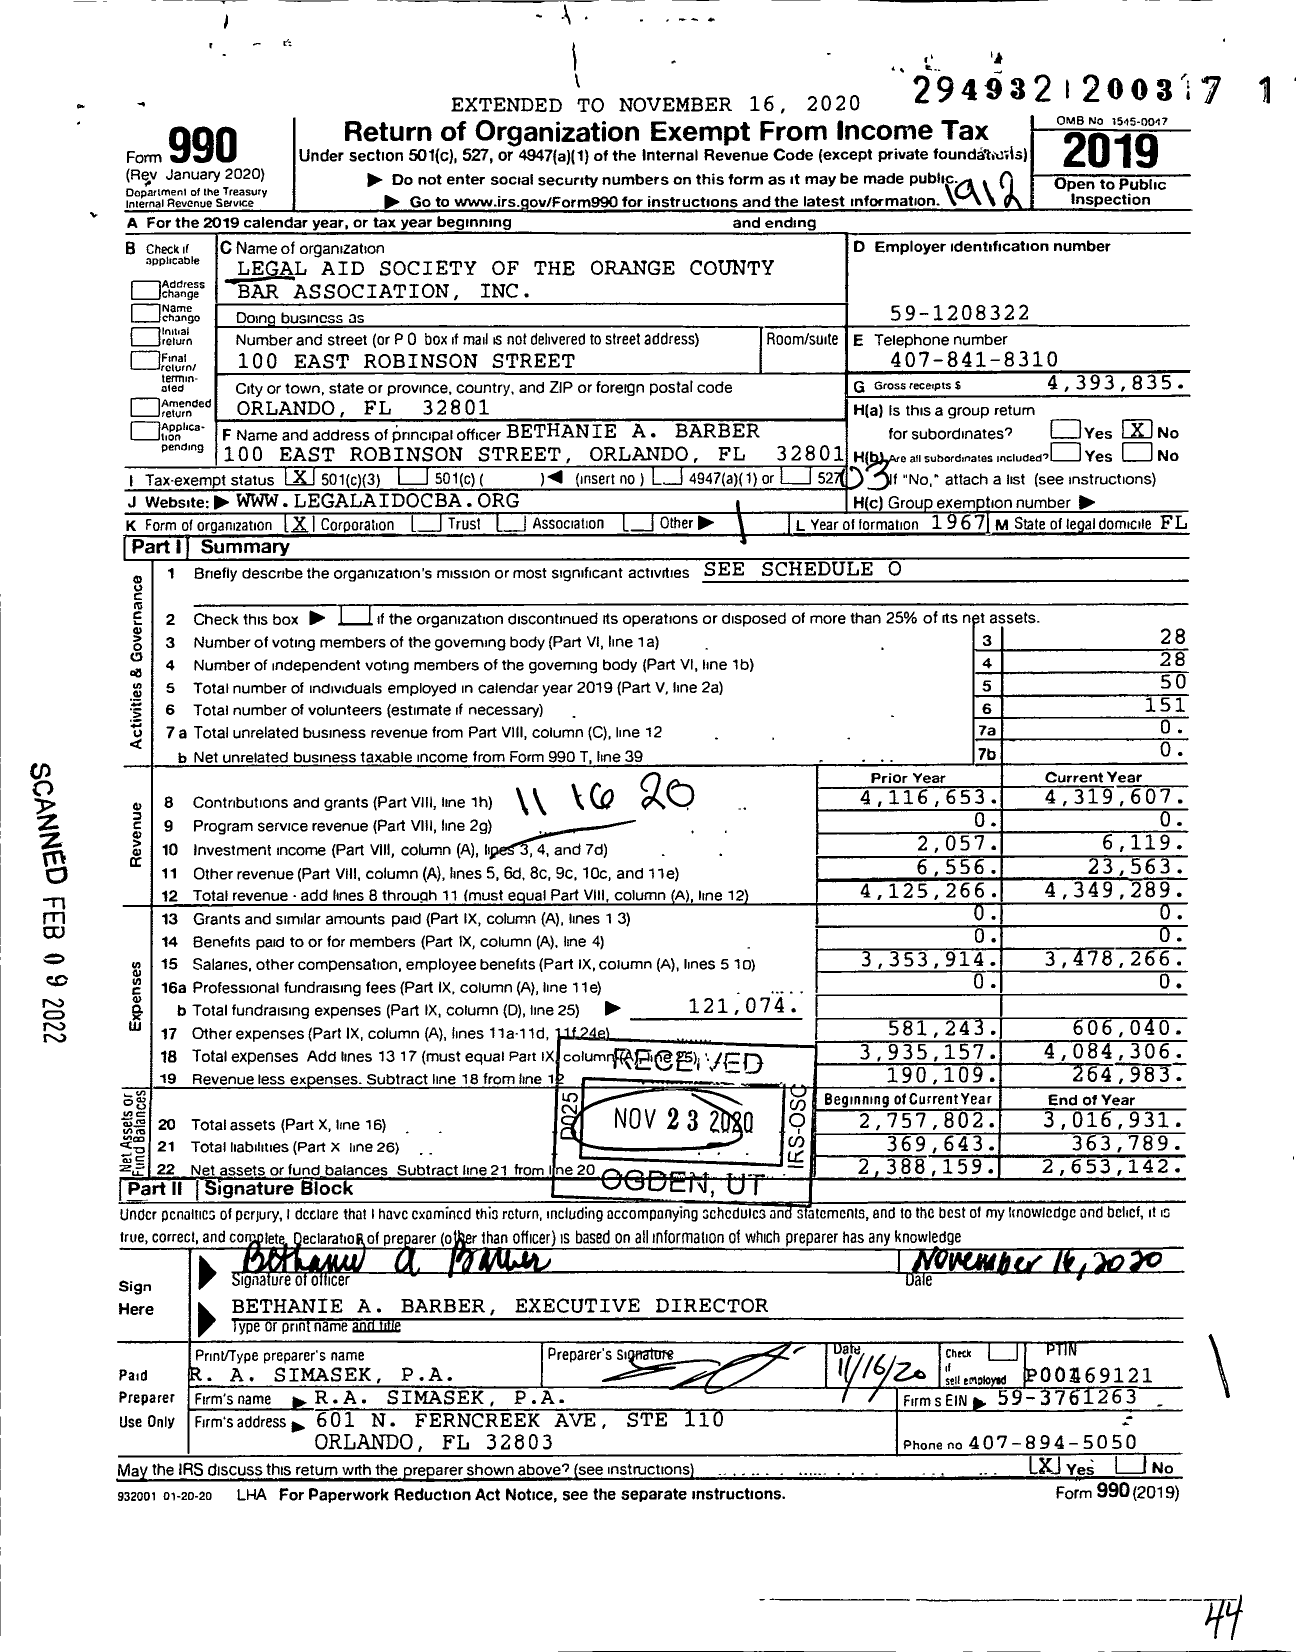 Image of first page of 2019 Form 990 for Legal Aid Society of the Orange County Bar Association